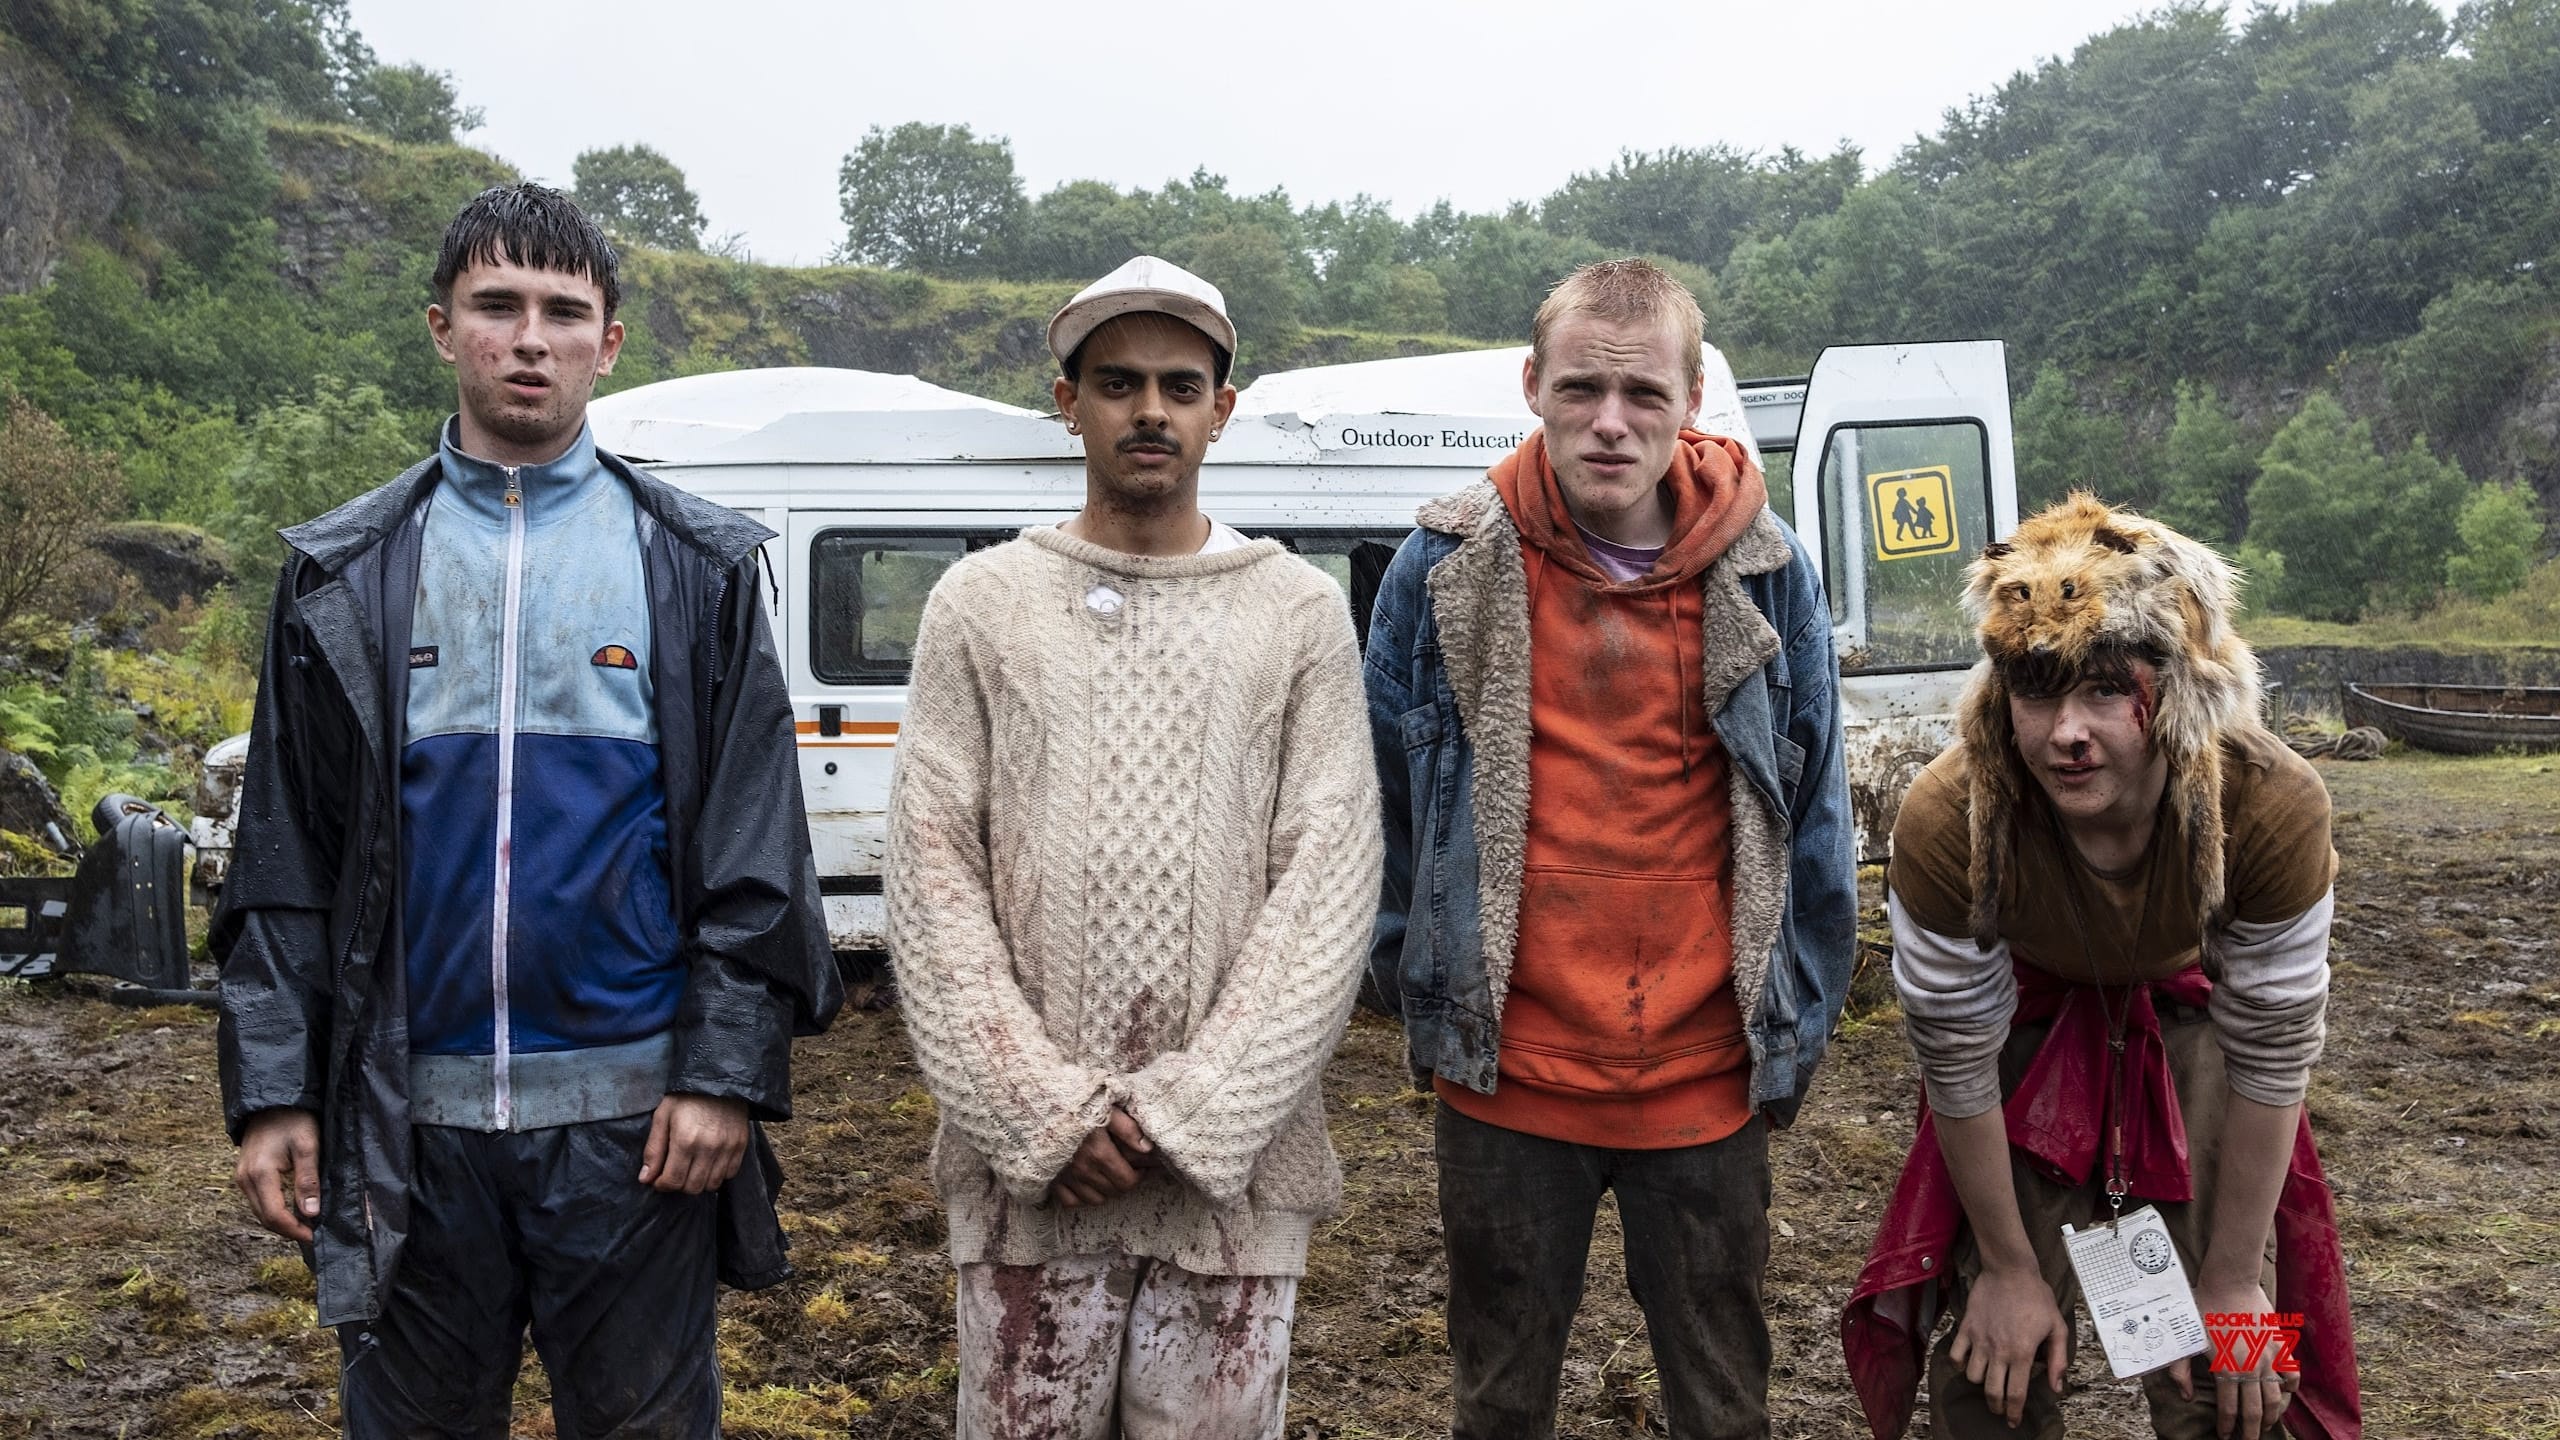 Screenshot from the film Get Duked! A group of young teens stand in the rain with their clothes wet and muddy in front of a busted van. 